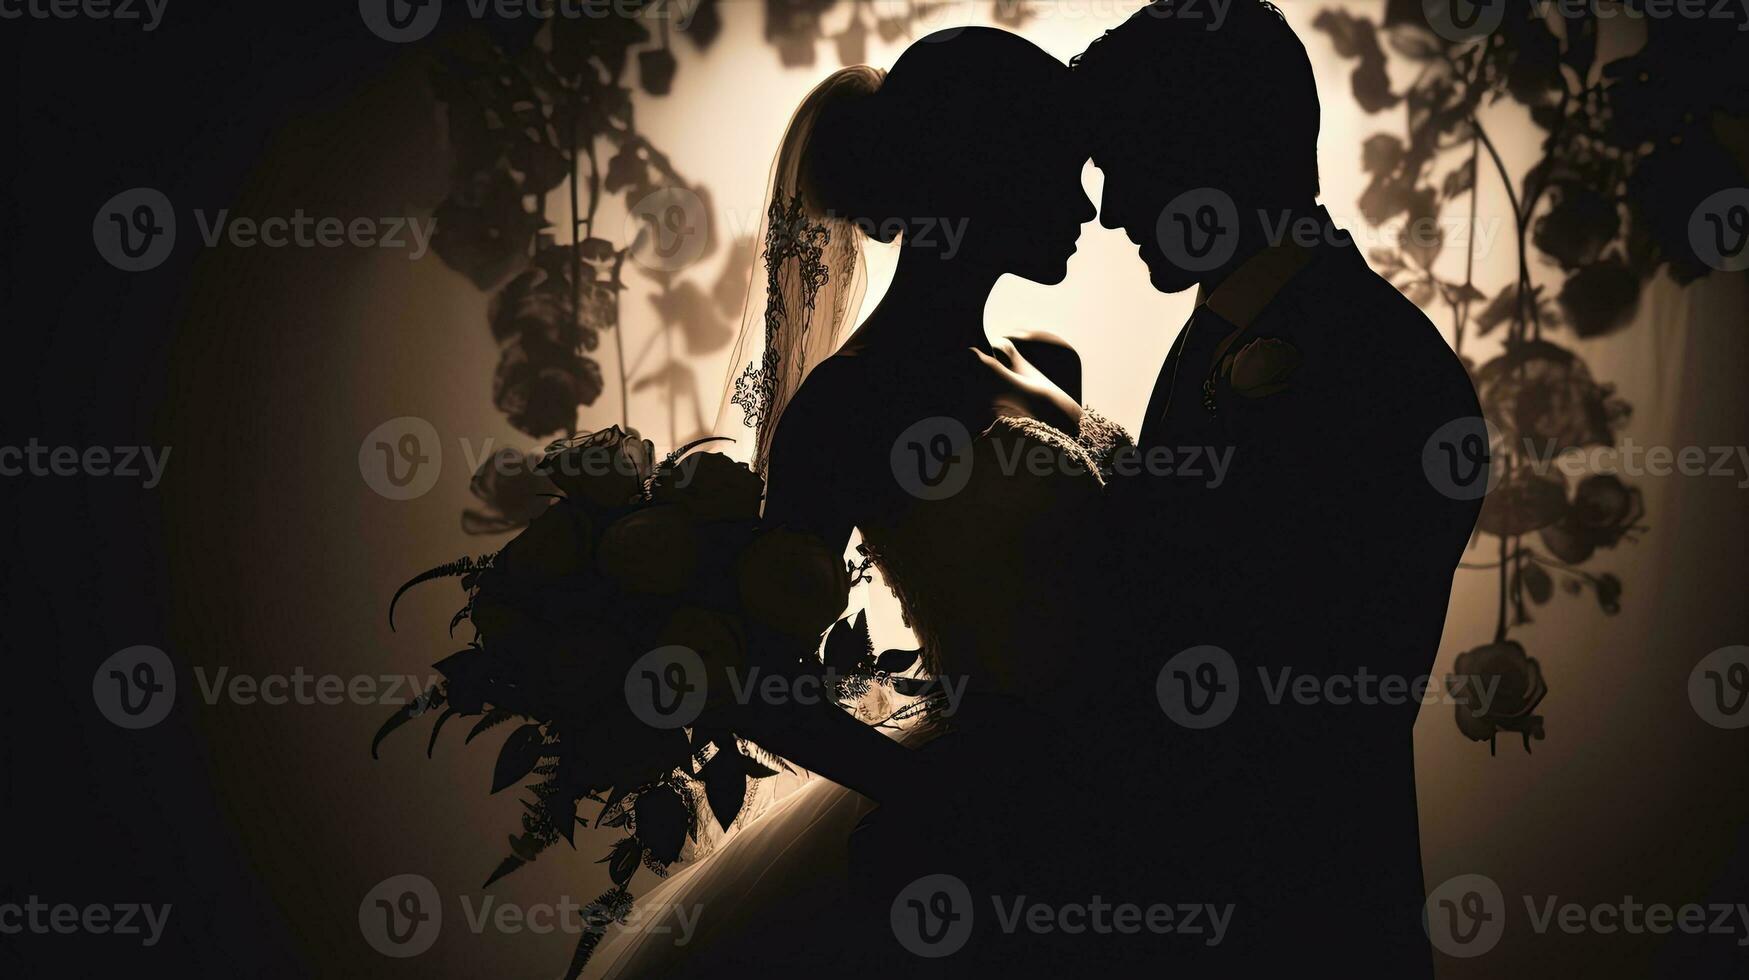 Monochrome colored bouquet of wedding roses takes center stage while the couple remains blurred. silhouette concept photo